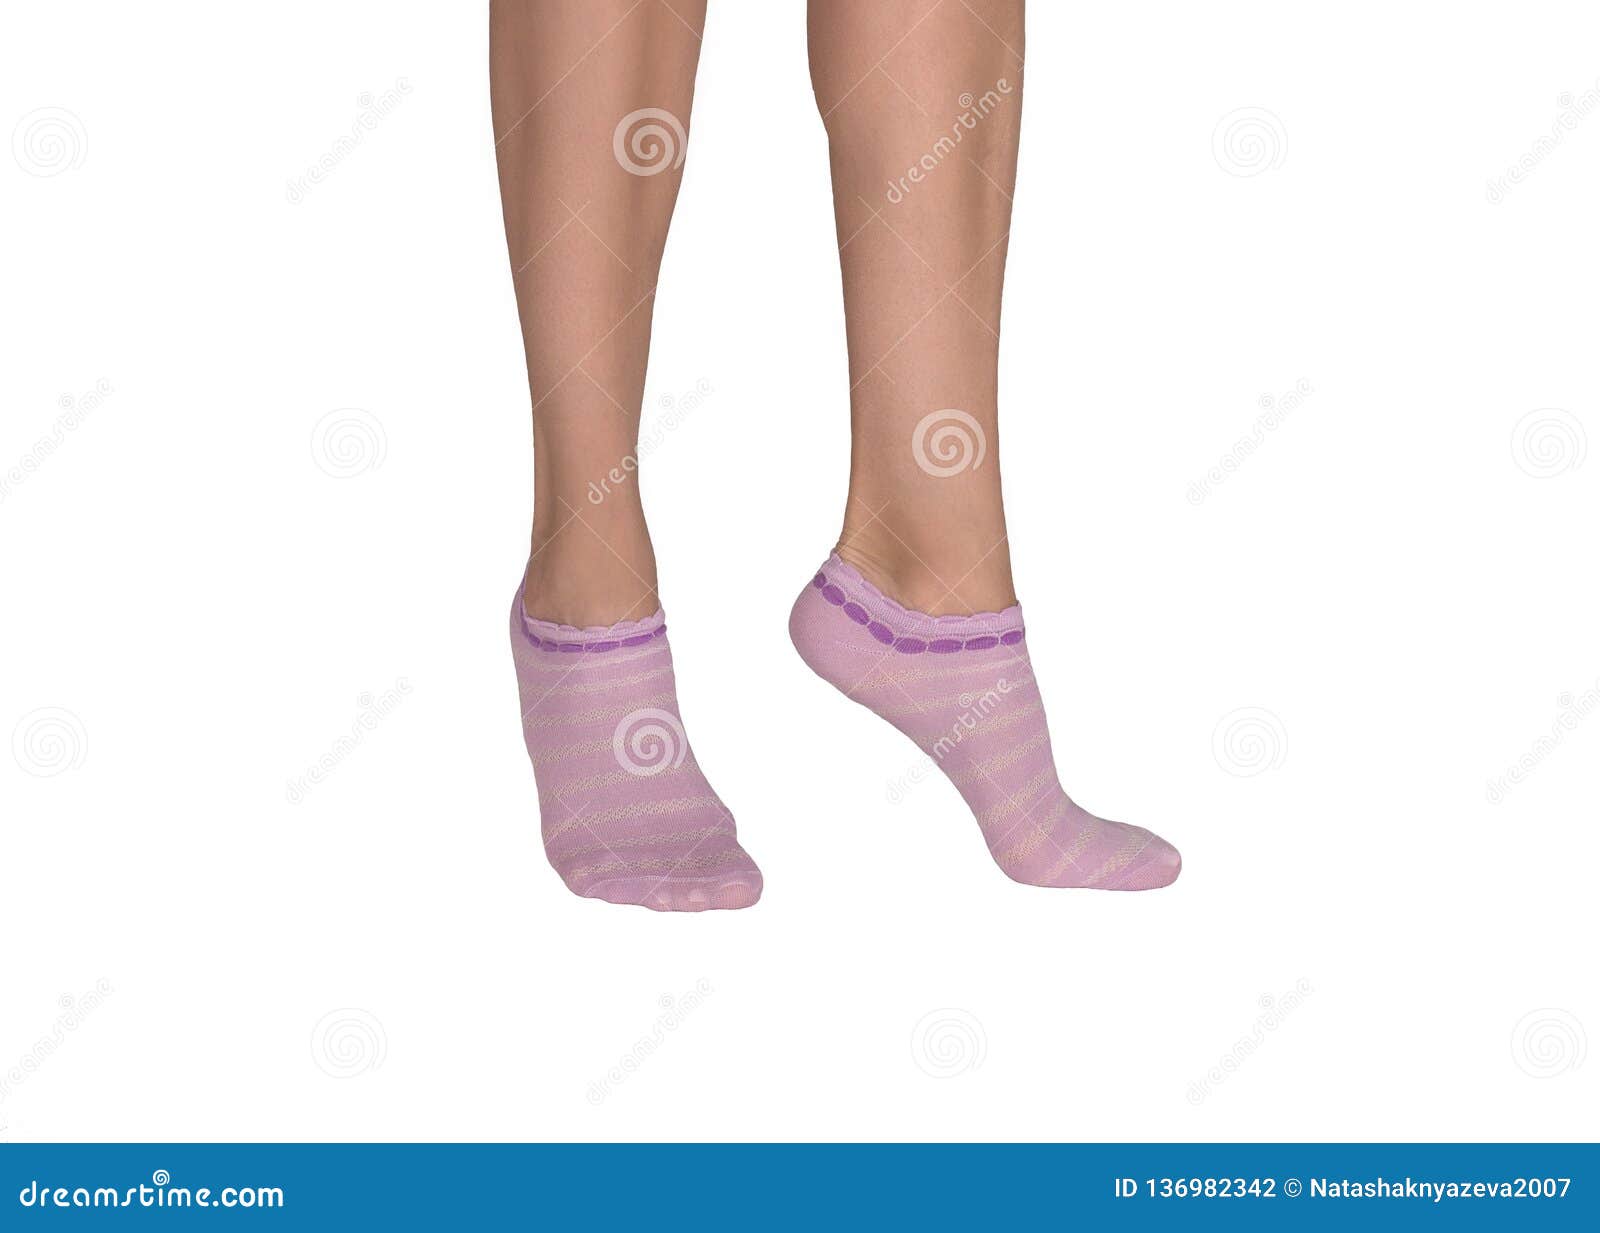 3,768 Woman Wearing Socks Stock Photos - Free & Royalty-Free Stock Photos  from Dreamstime